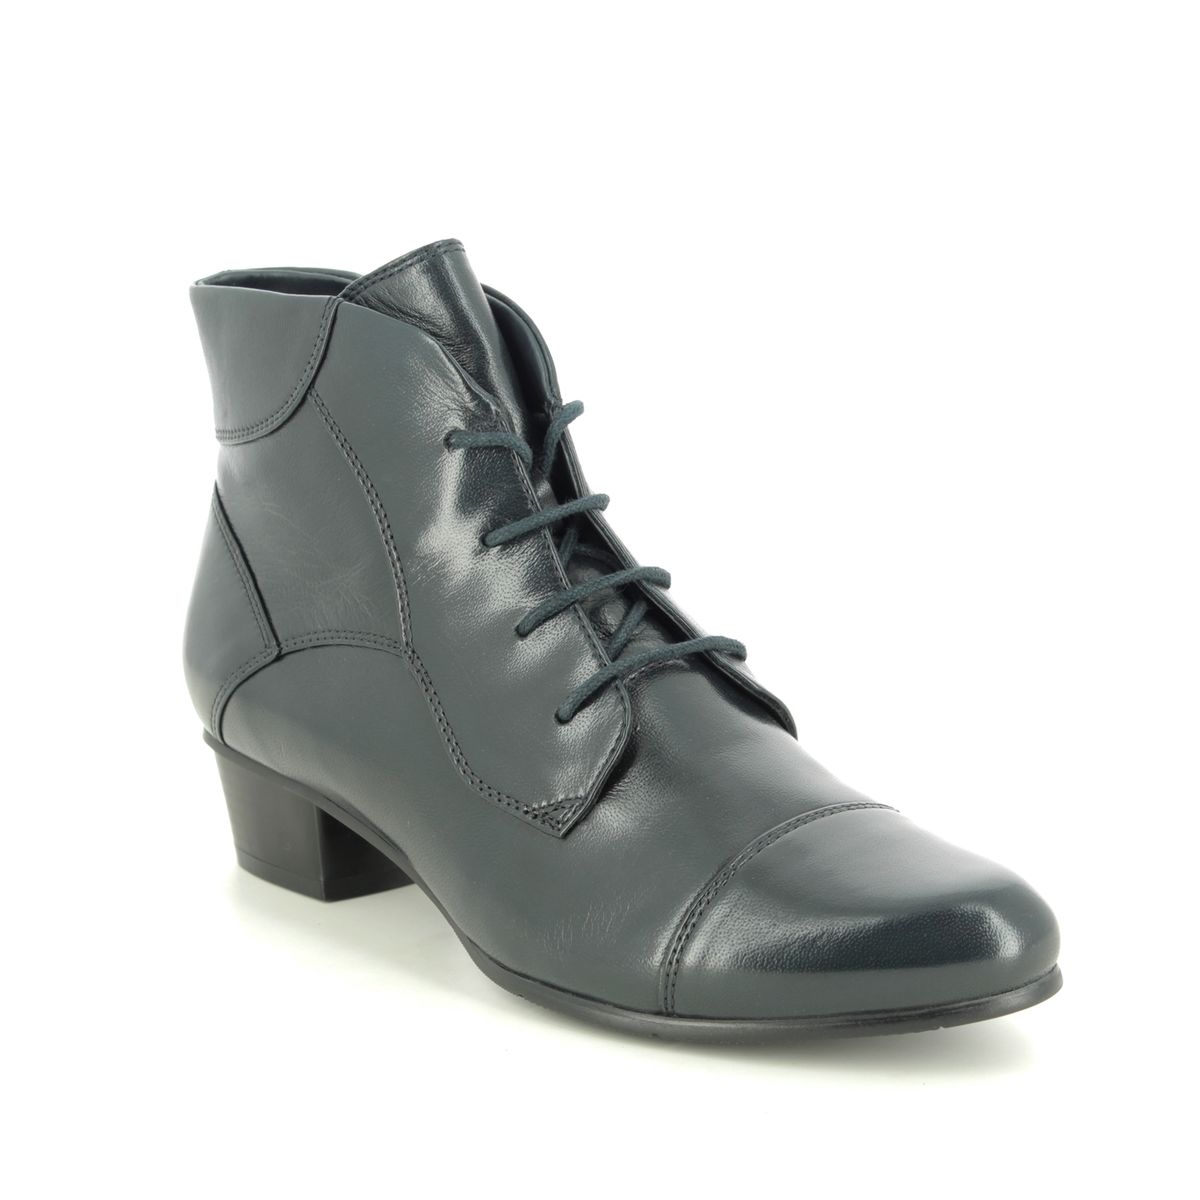 Regarde Le Ciel Stefany 123 Lace Navy Leather Womens Boots 0123-150 Ankle Boots In Soft Navy Leather Leather In Size 36